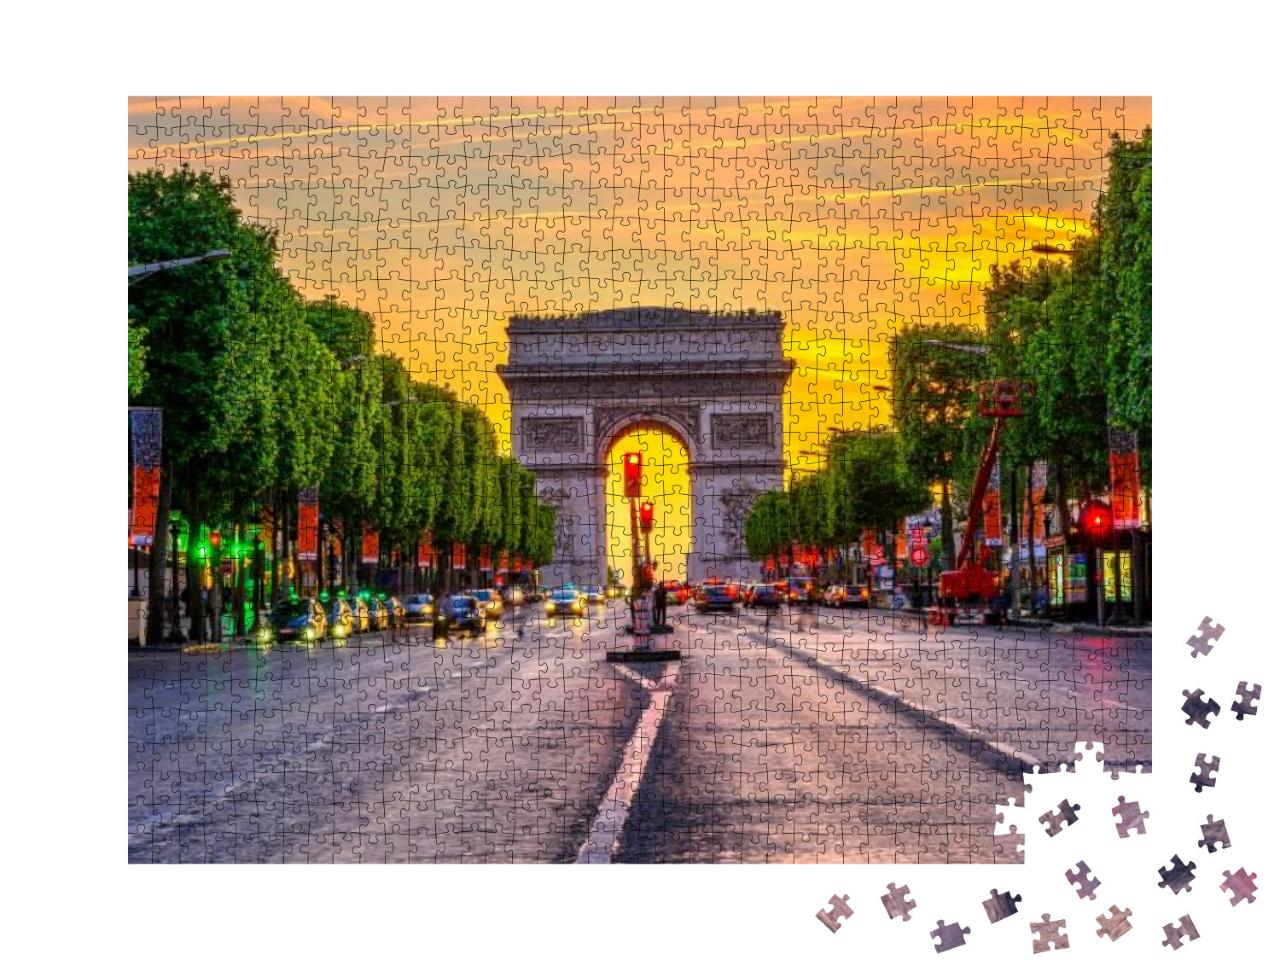 Champs-Elysees & Arc De Triomphe At Night in Paris, Franc... Jigsaw Puzzle with 1000 pieces